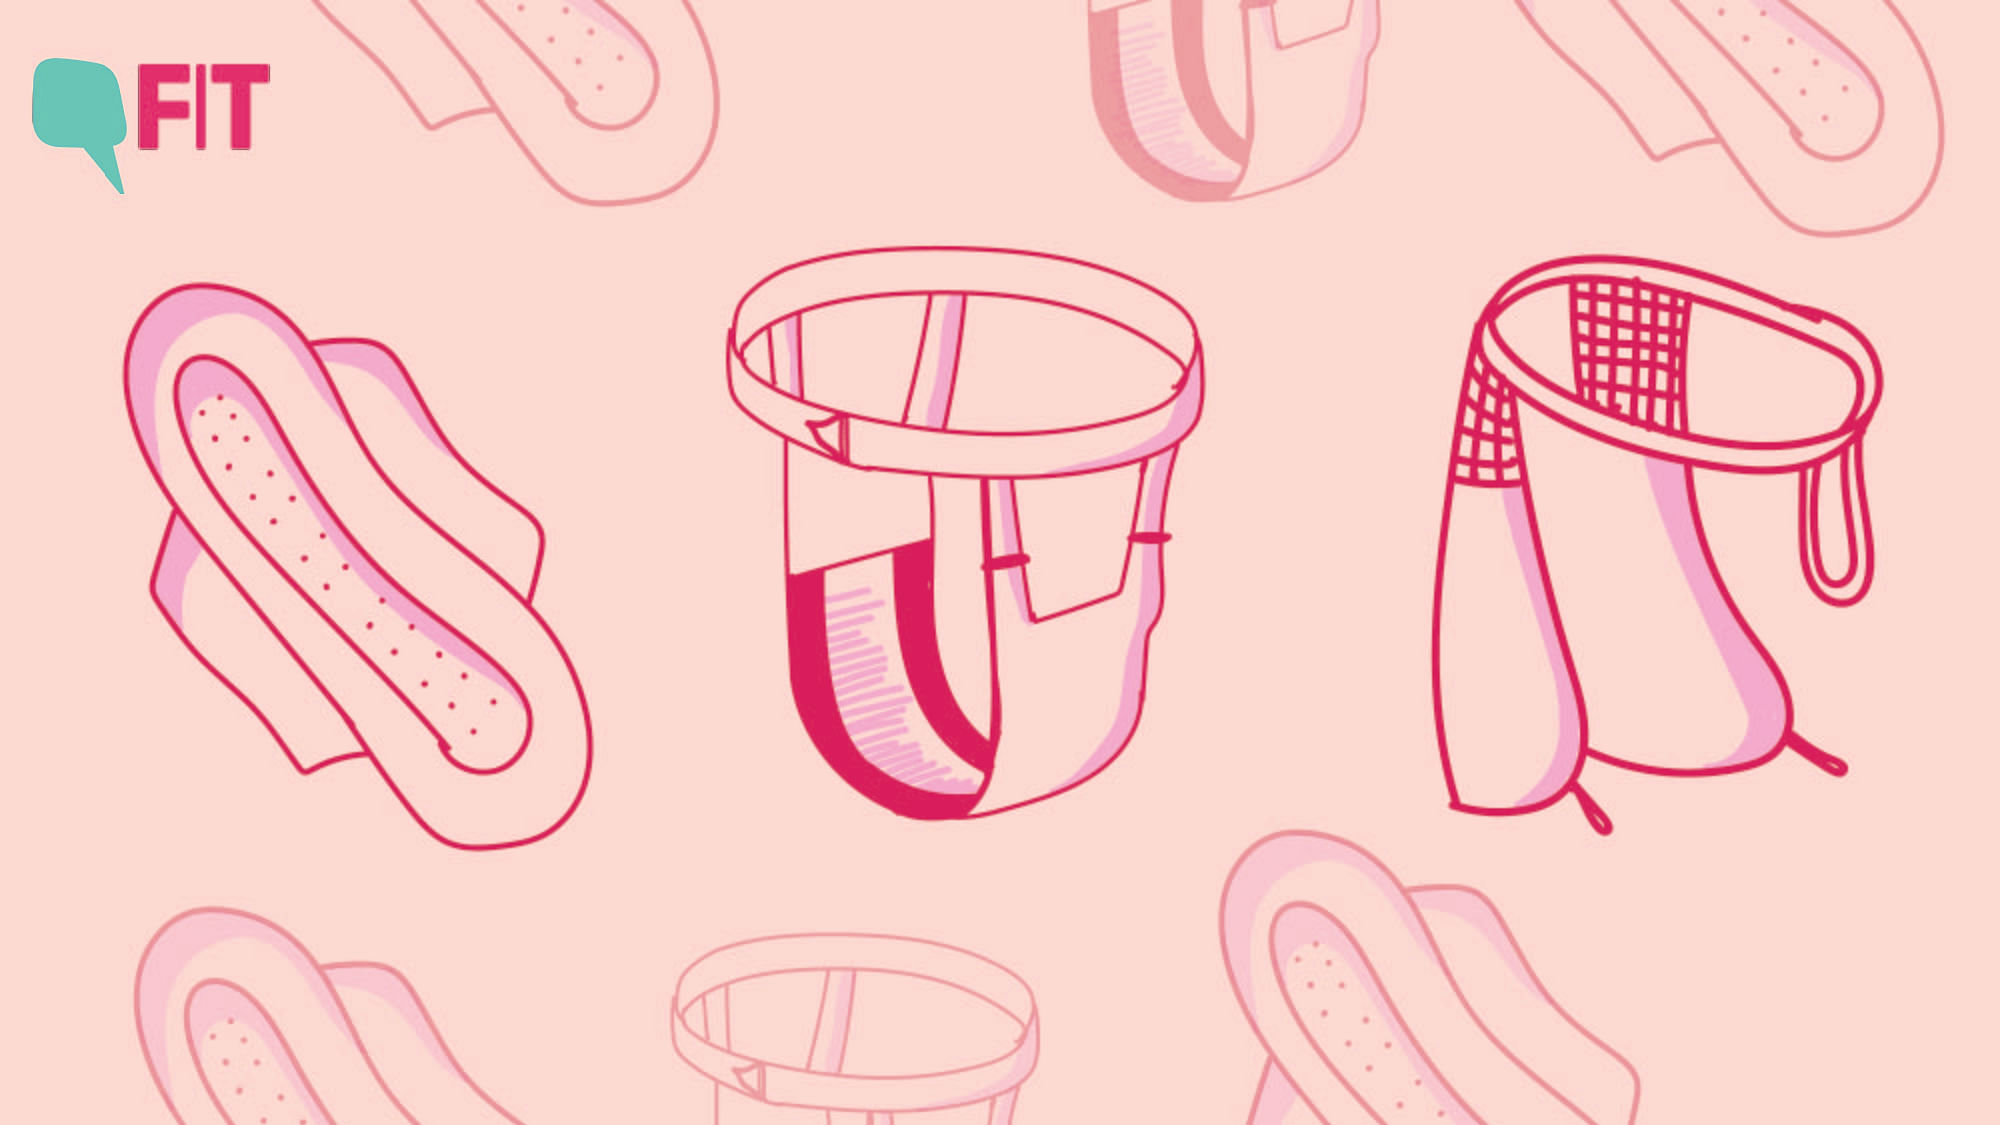 From menstrual belts to aprons to pads as we know them today - menstruation products have come a long way from what they used to be.